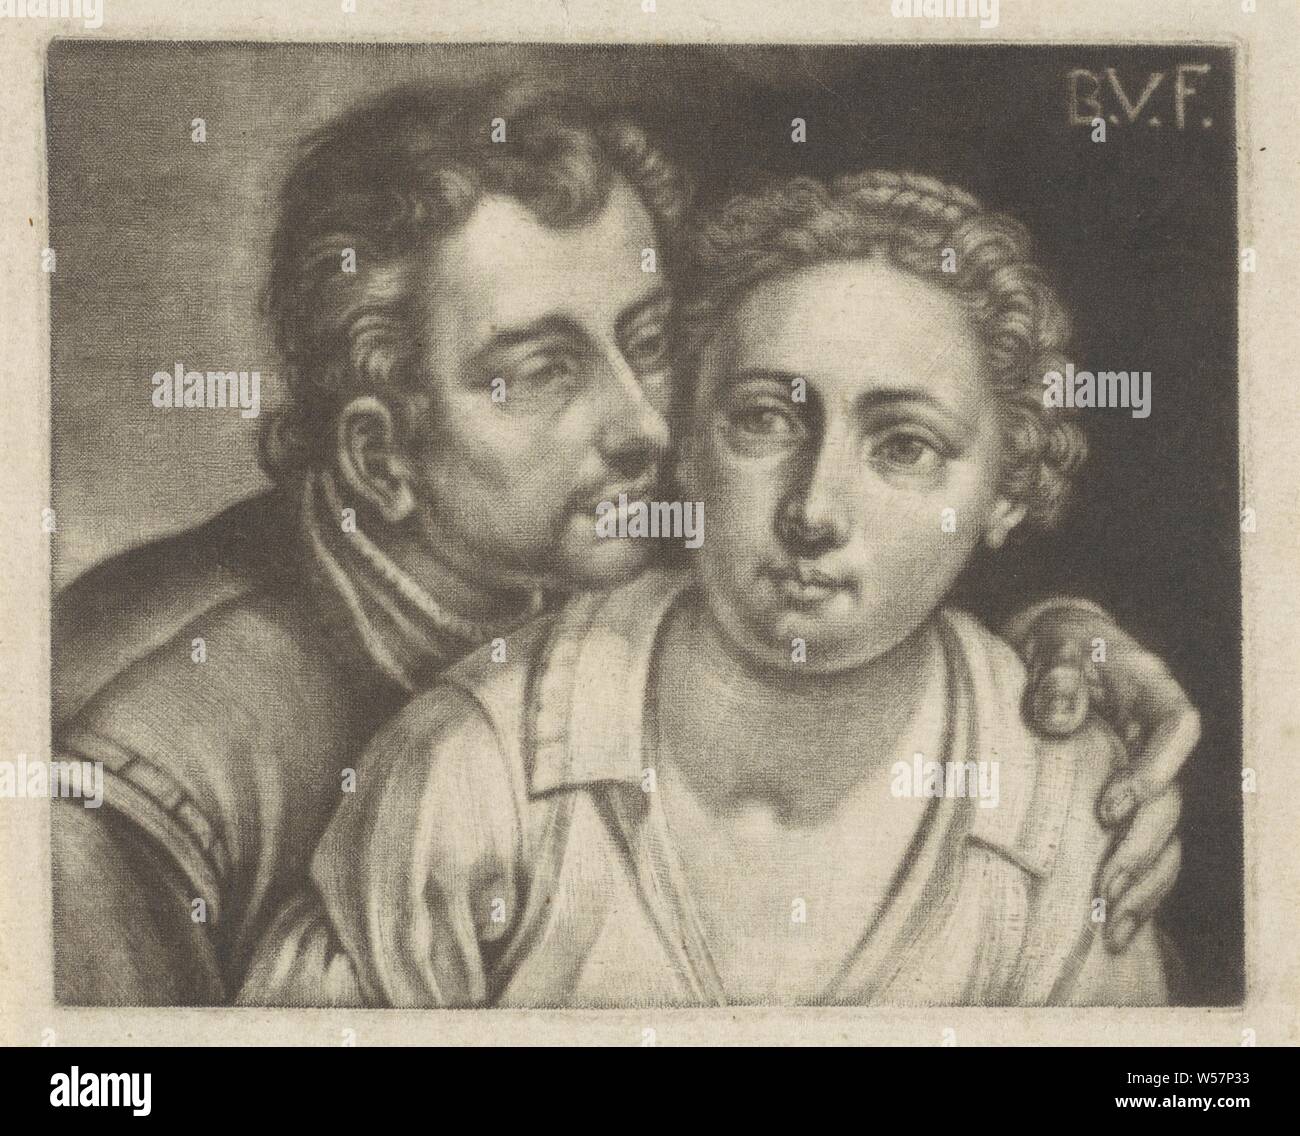 A man and a woman, Bernard Vaillant (mentioned on object), 1642 - 1698, paper, h 104 mm × w 128 mm Stock Photo